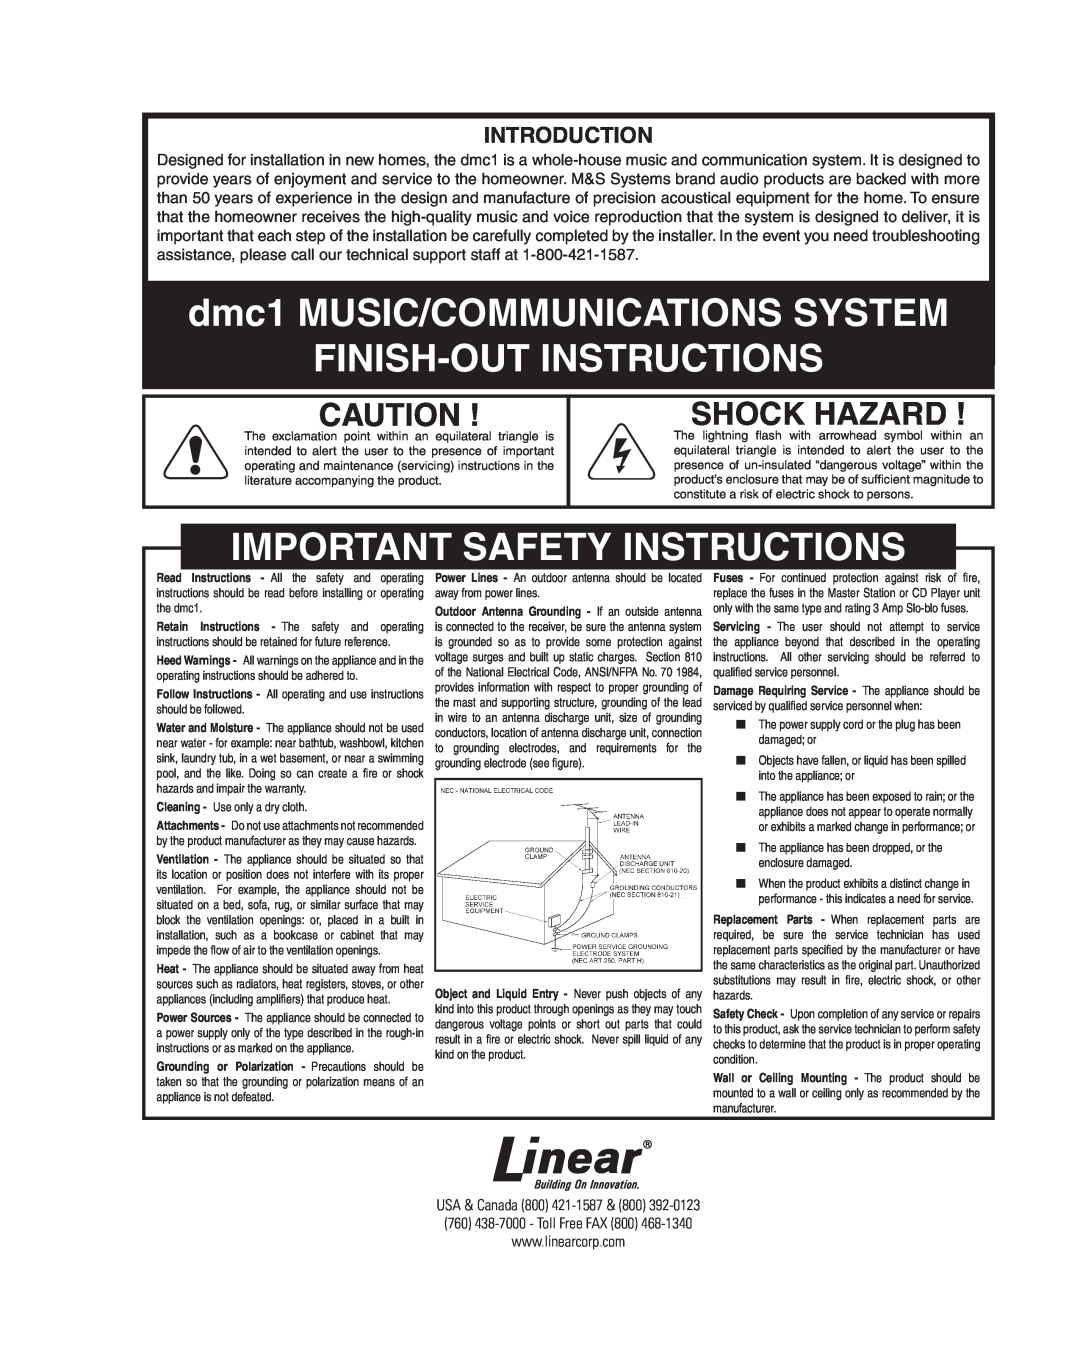 M&S Systems DMC1HC important safety instructions USA & Canada, dmc1 MUSIC/COMMUNICATIONS SYSTEM, Finish-Outinstructions 